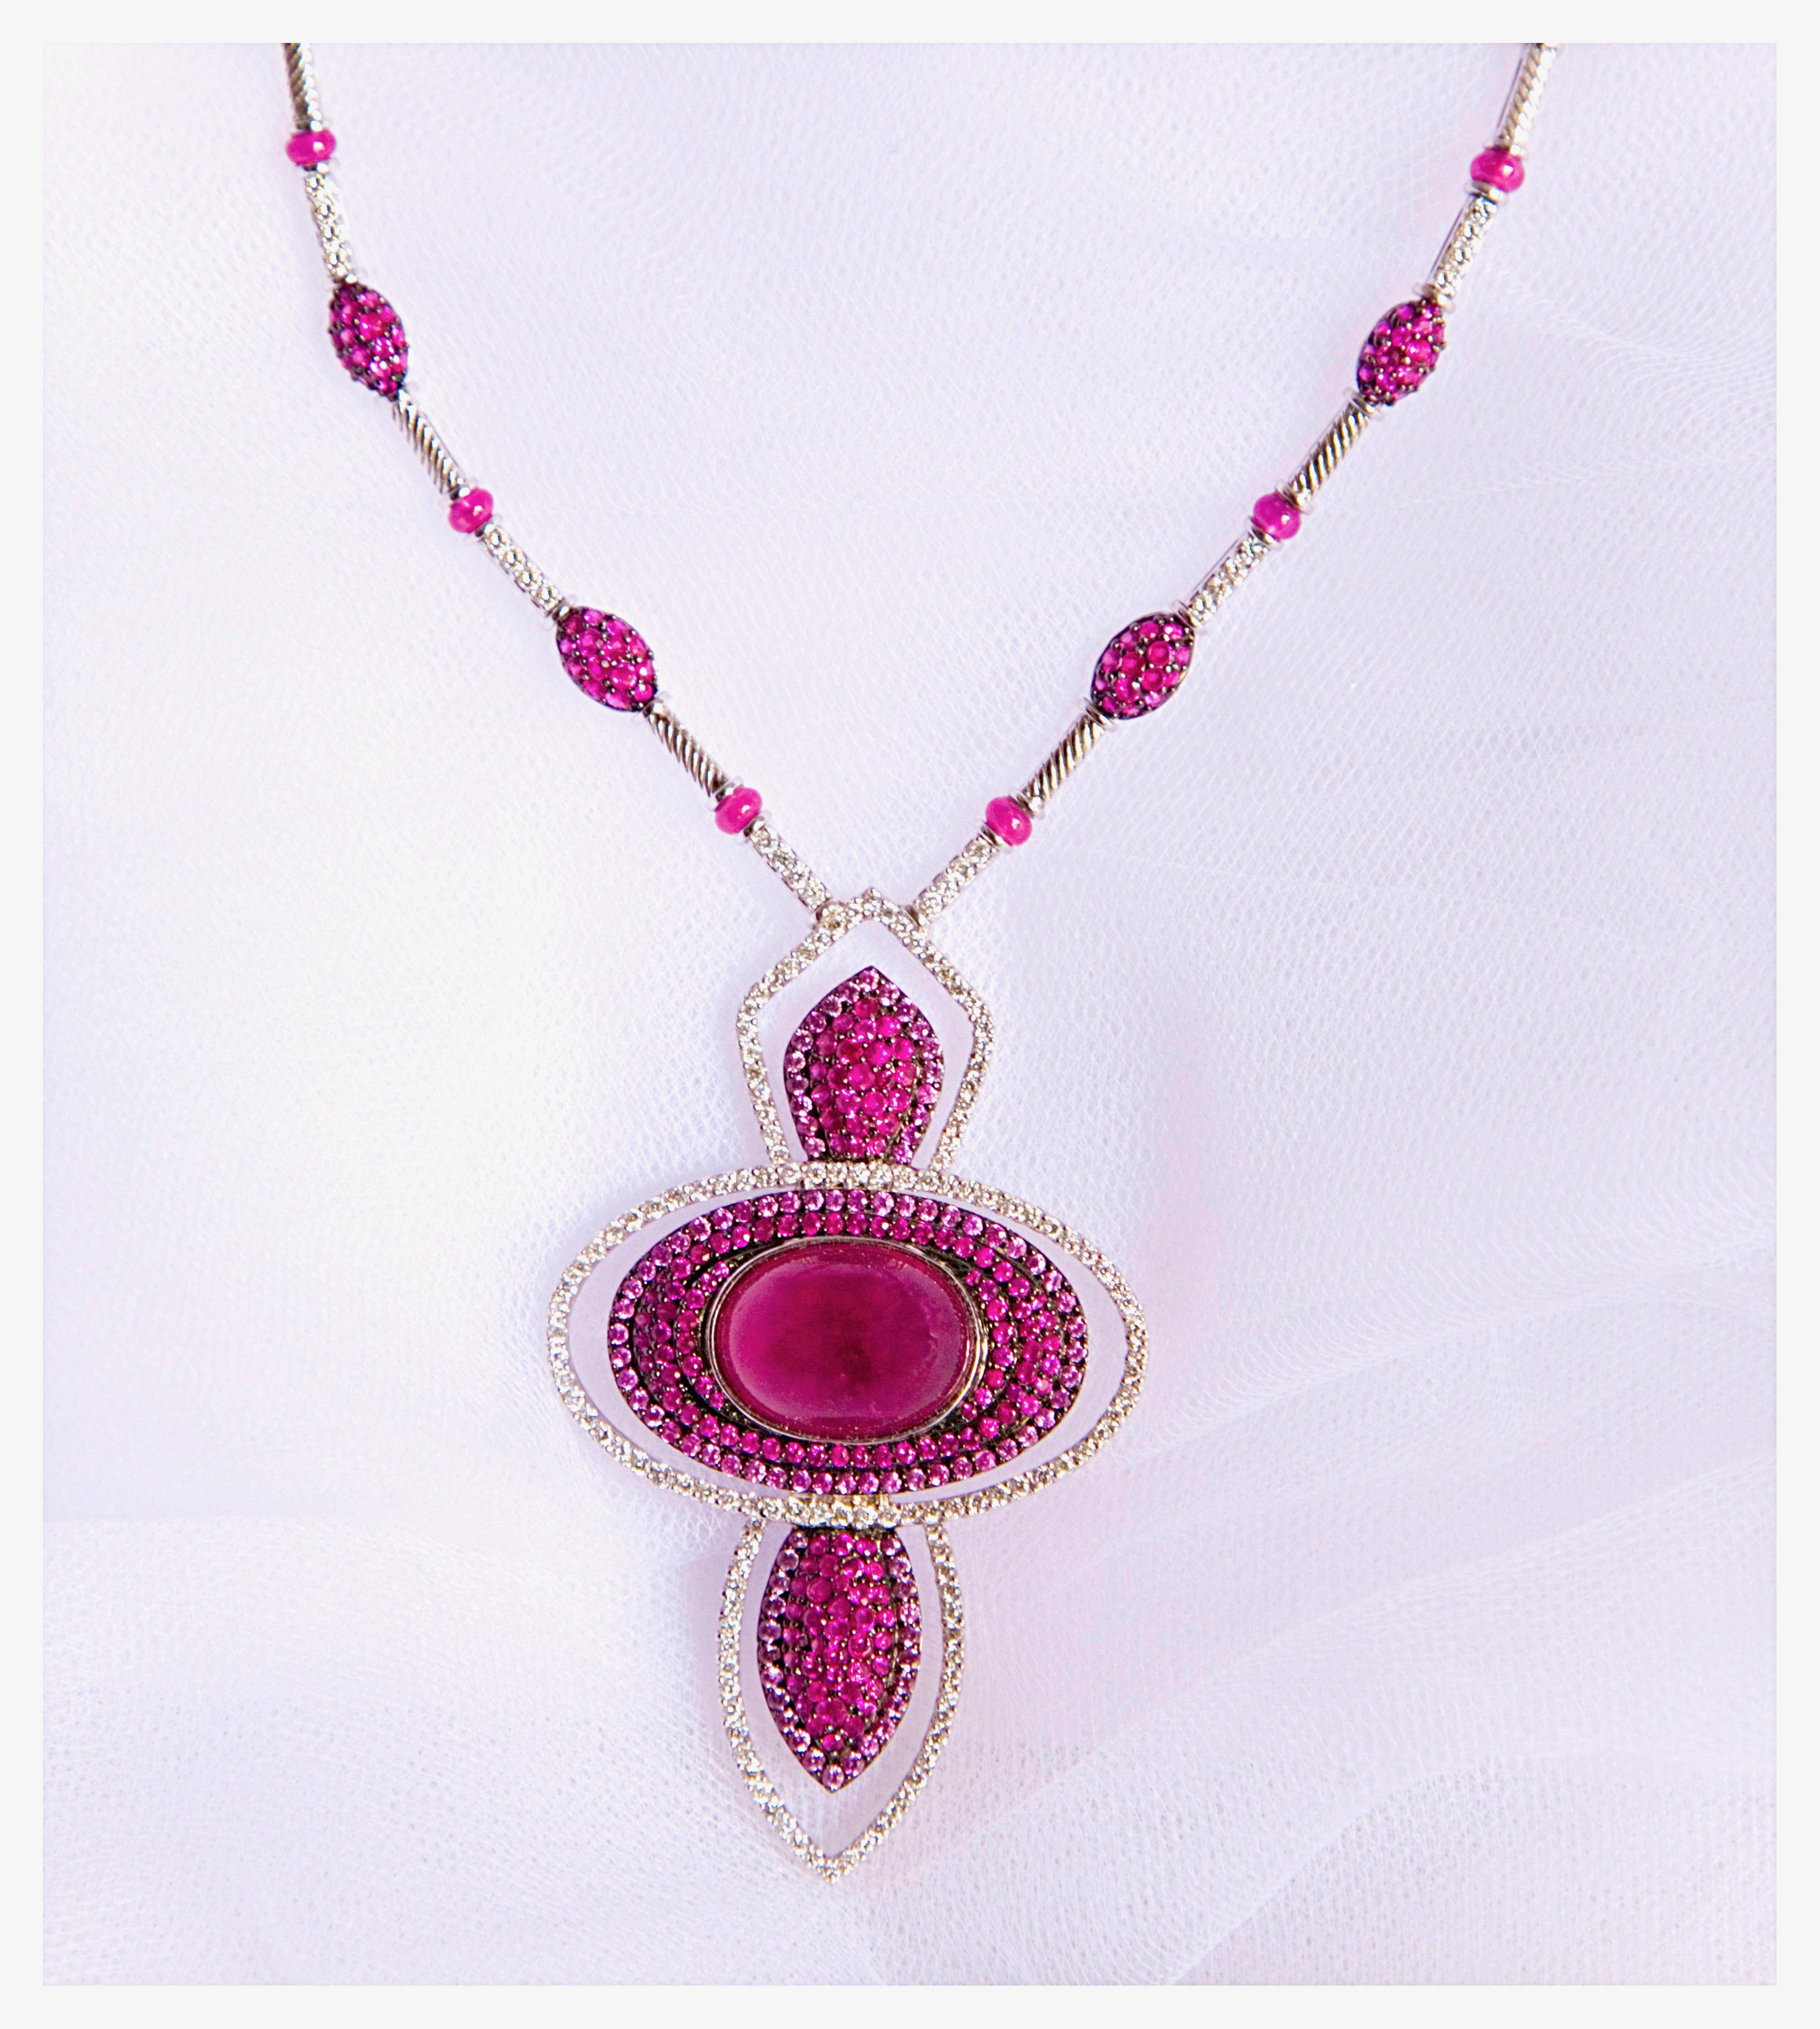 Sensational 18 Karat white gold necklace showcasing a captivating palette of pink and red with the central 22,95 carat natural pink tourmaline cabochon,  enhanced by  21,07 carat rubies and pink sapphires  exquisitely curated and 3,55 carat natural